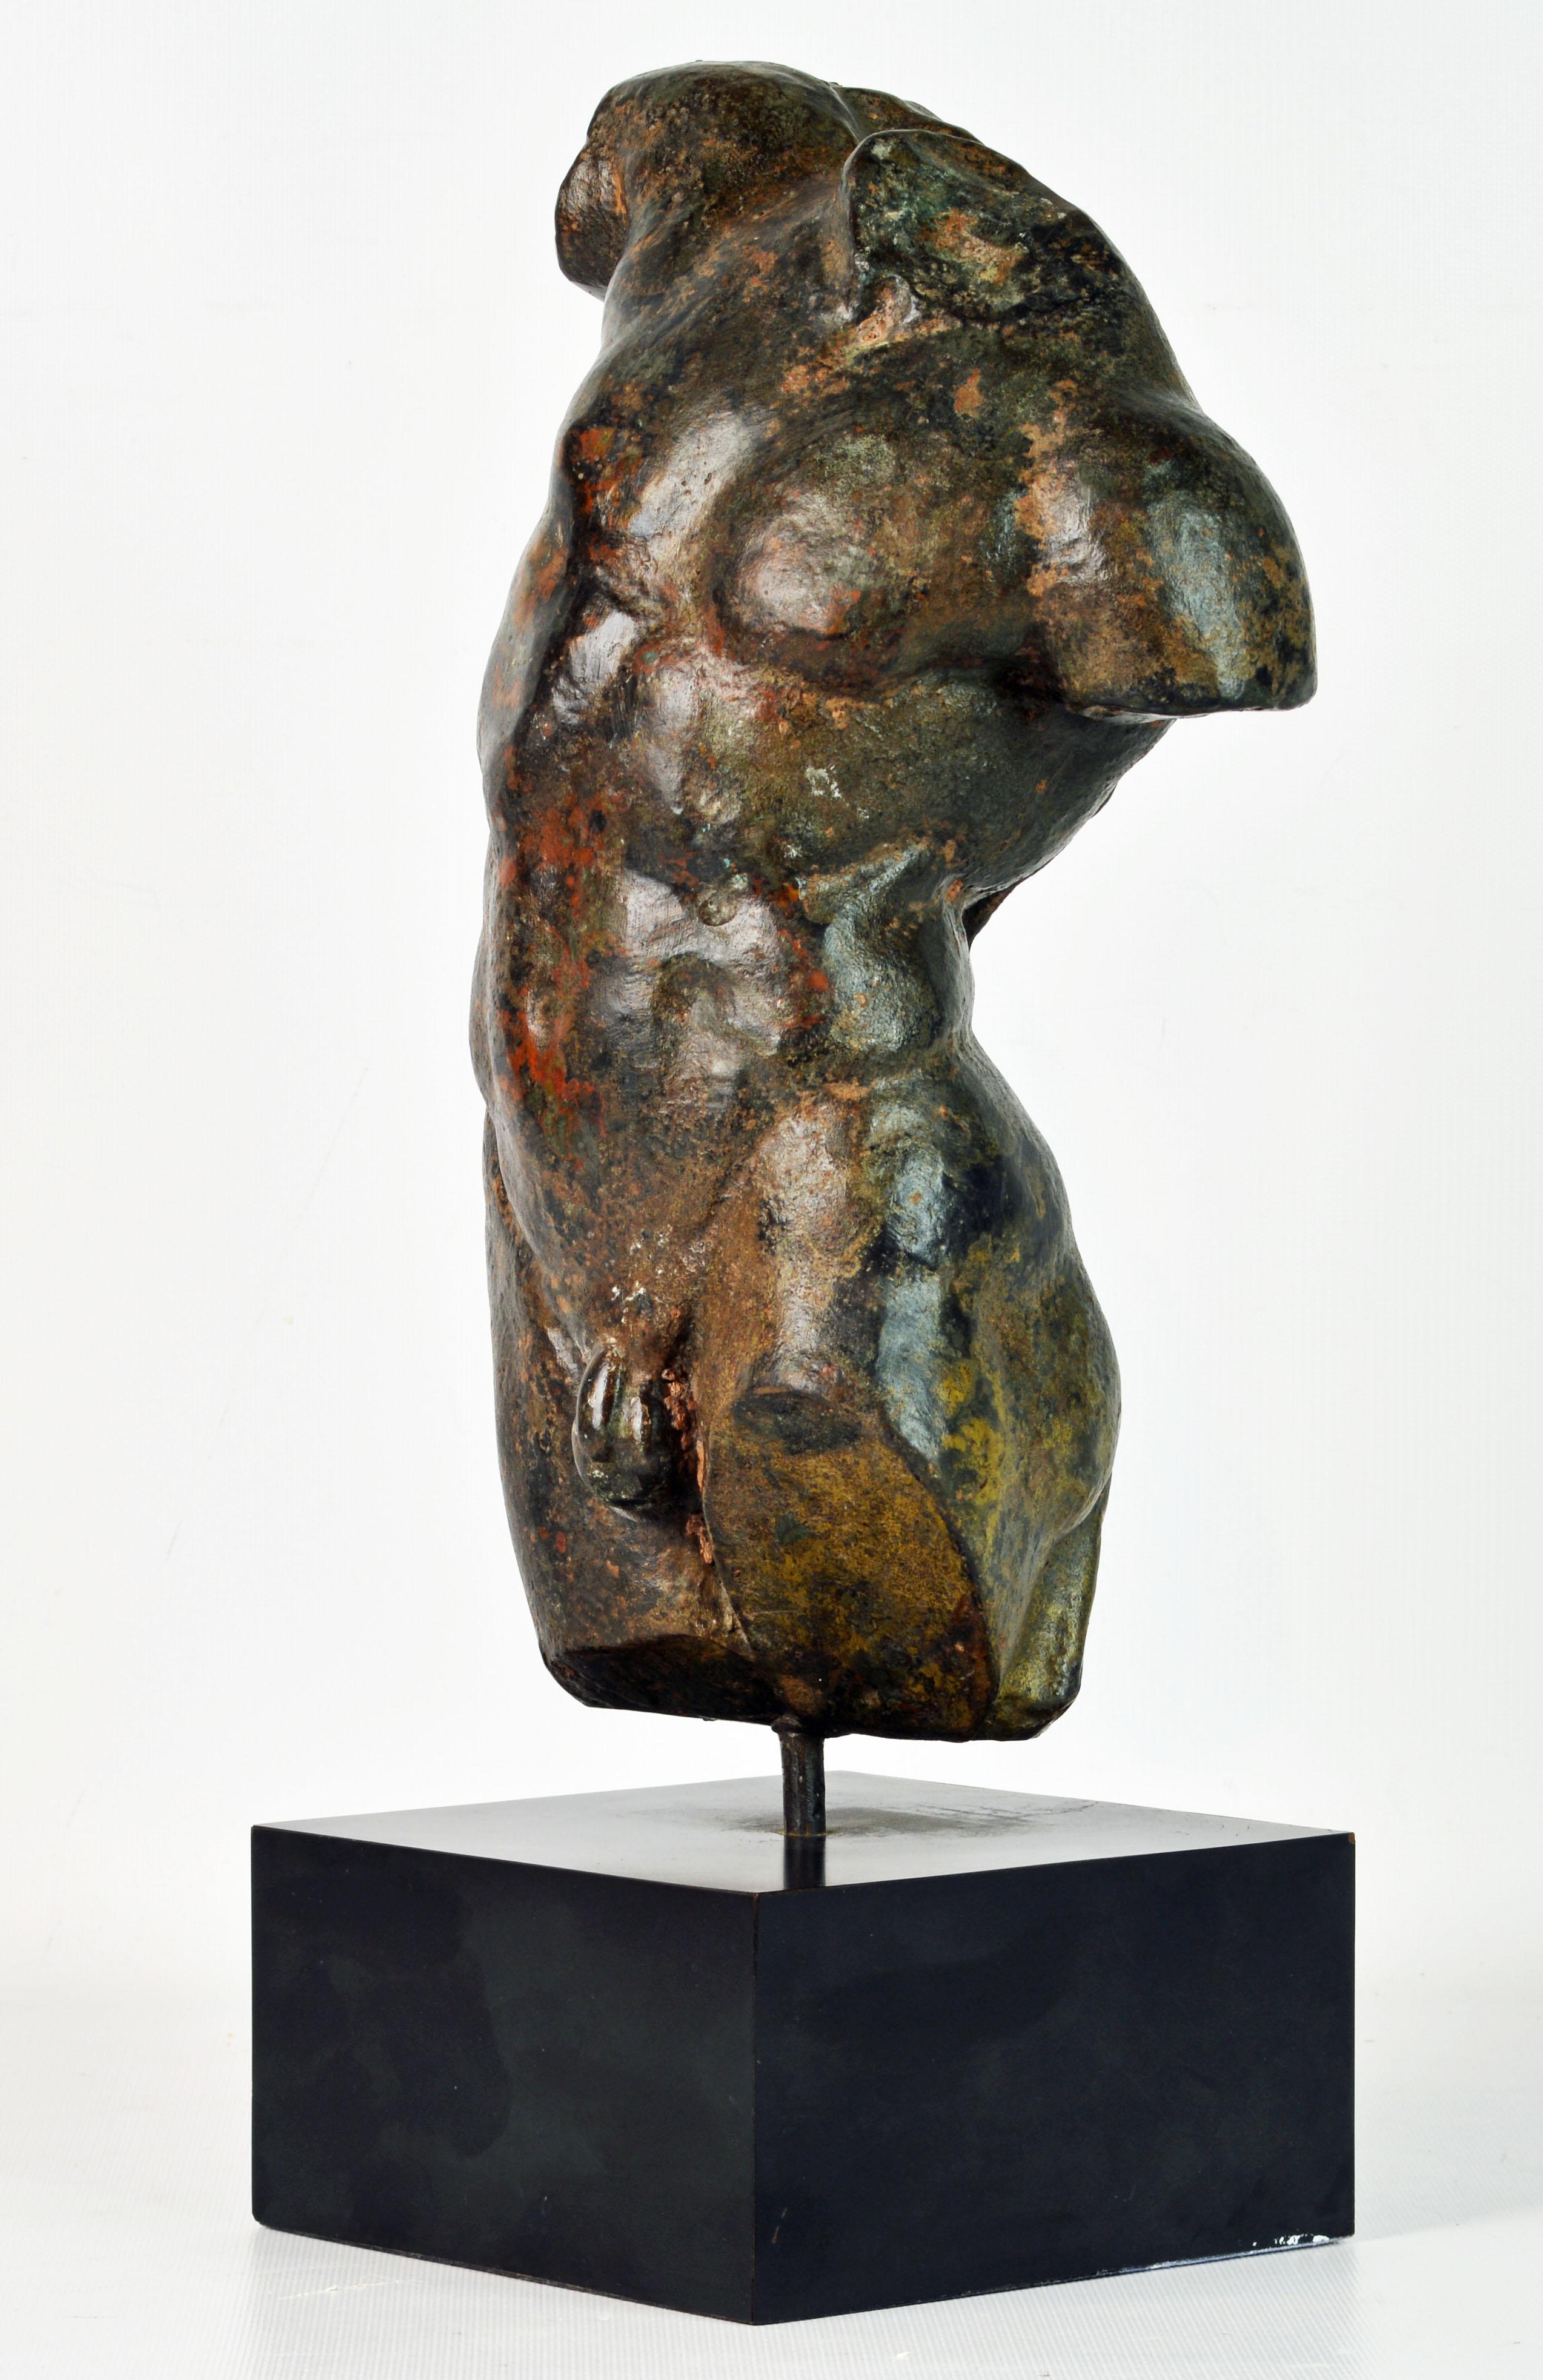 Standing almost 17 inches tall, made of marble composition and very heavy this sculpture has been finished with a rich earthy patina featuring oxide red, brown, black, ochre and verdigris tones making it an ever changing sight from all angles. The